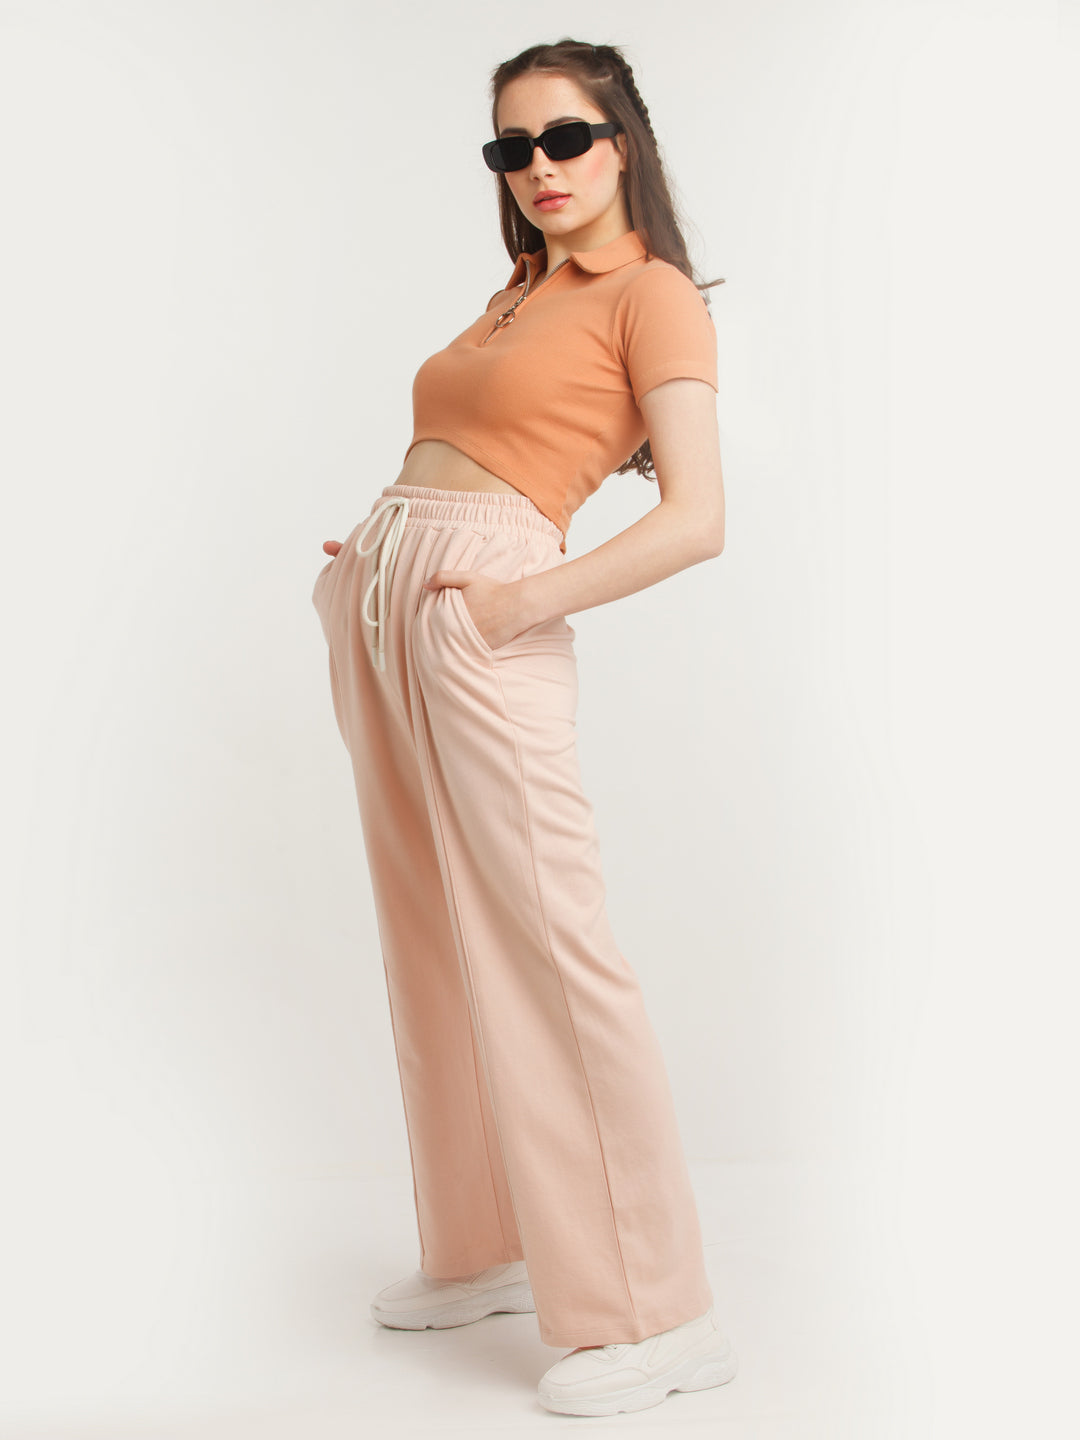 Peach Solid Joggers For Women